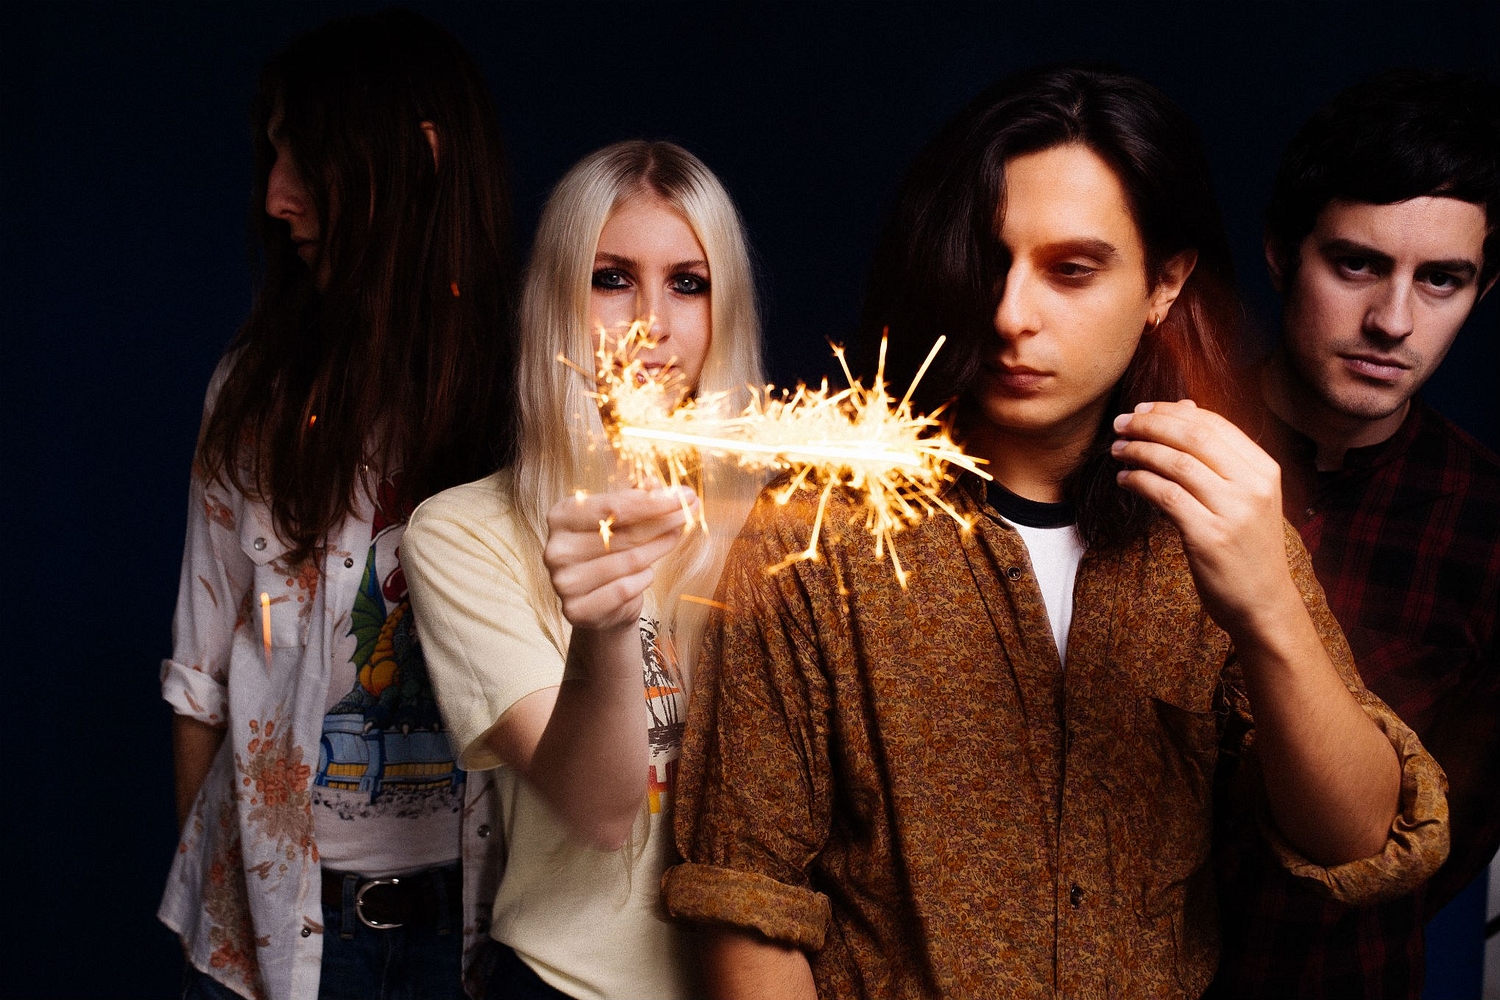 INHEAVEN: “We’ll hit the ground running in the new year”